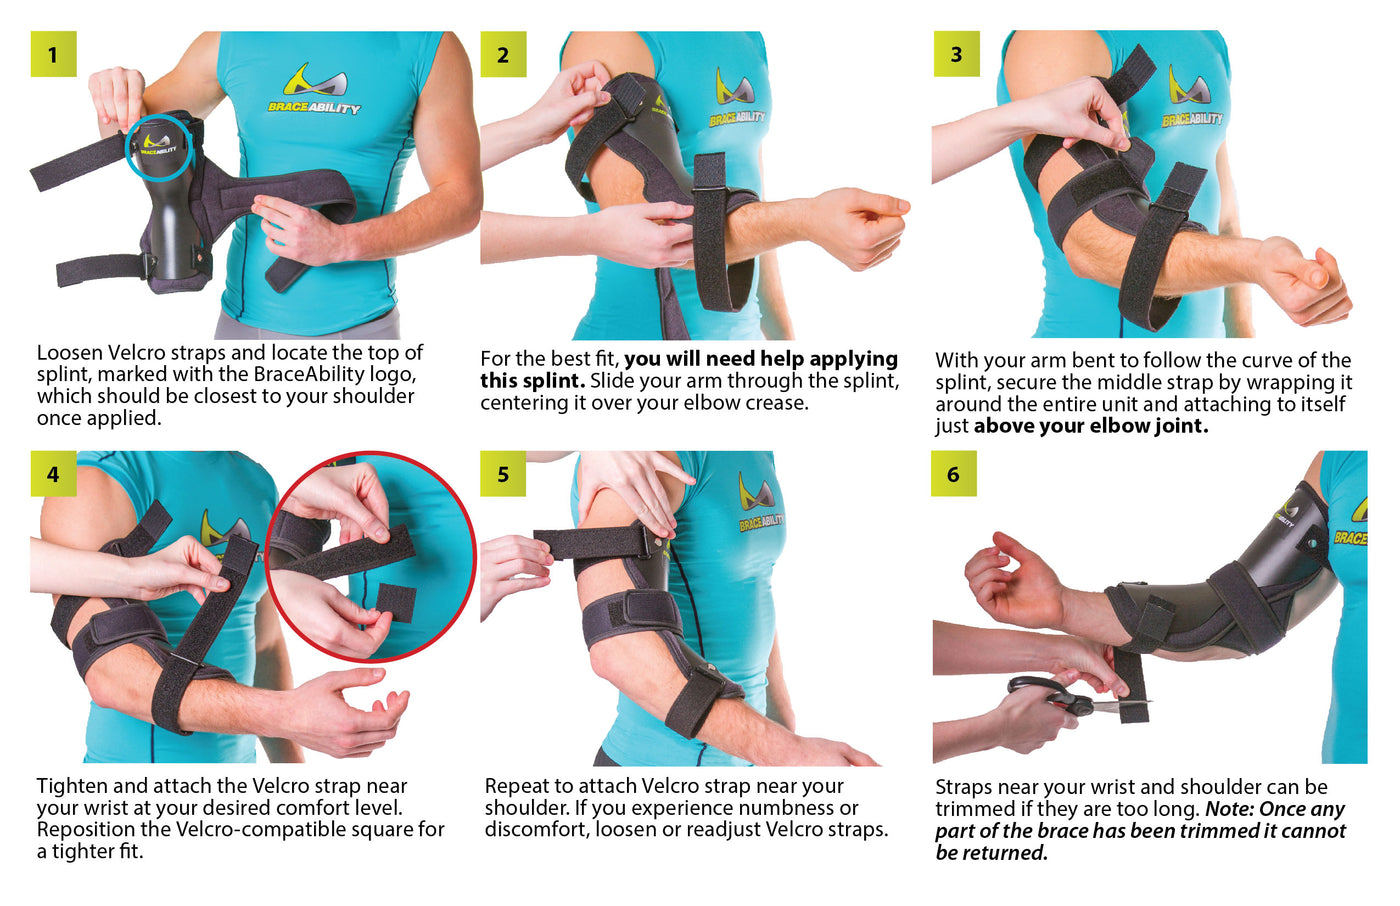 How to put on the cubital tunnel splint instruction sheet